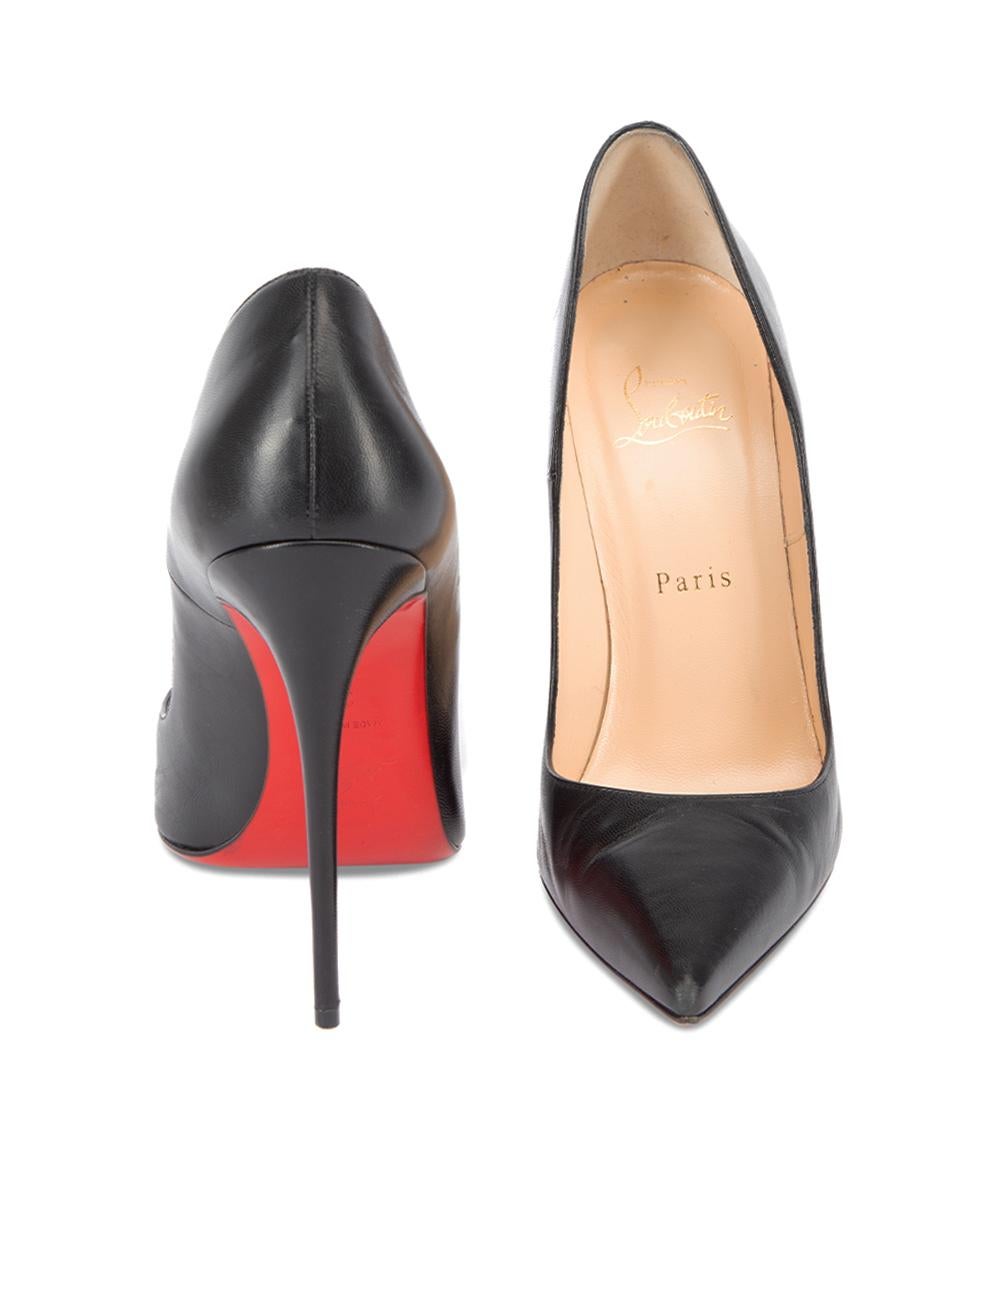 Christian Louboutin Women's Black Pointed Toe So Kate Pumps In Good Condition In London, GB